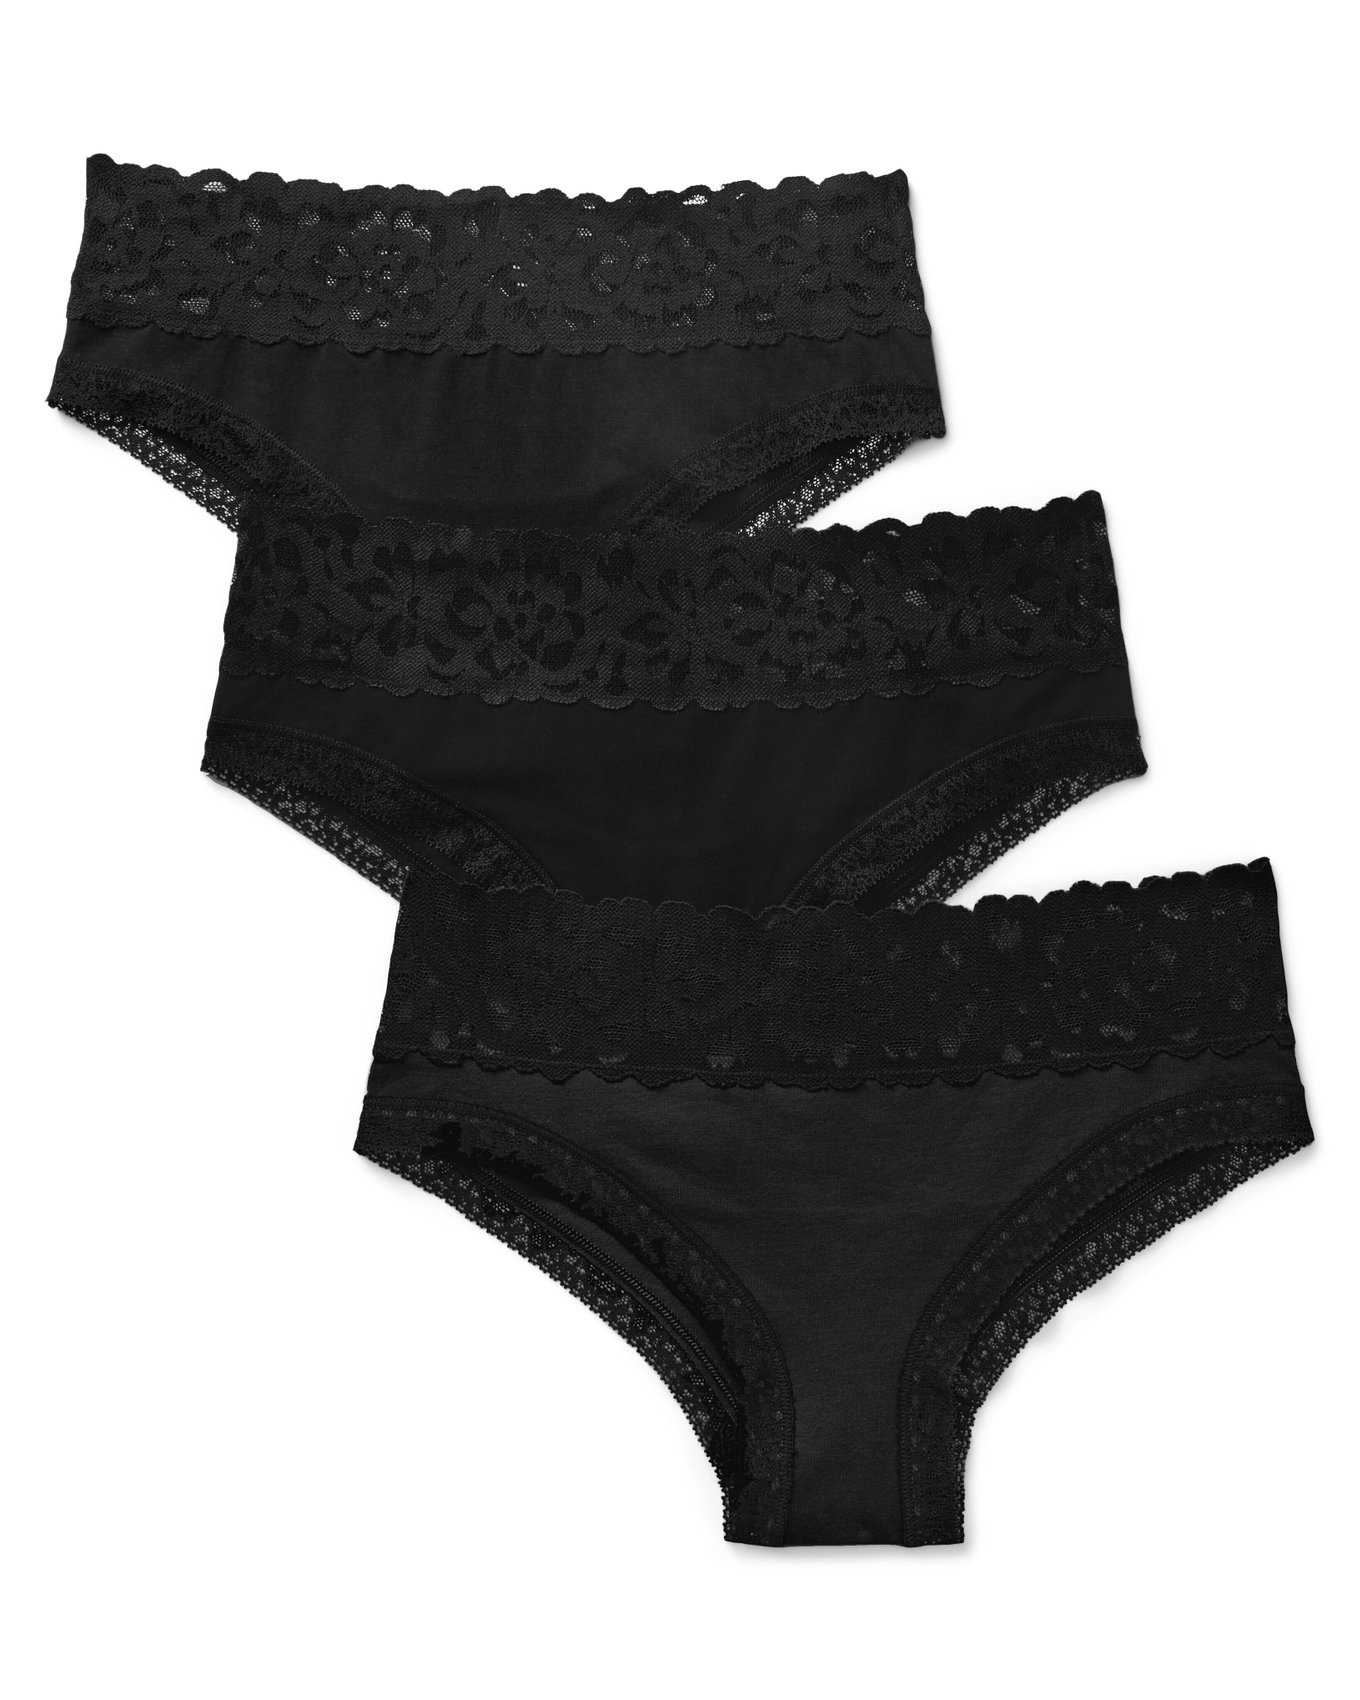 Essentials Women's B:Low Rise Hipster-3 Pair